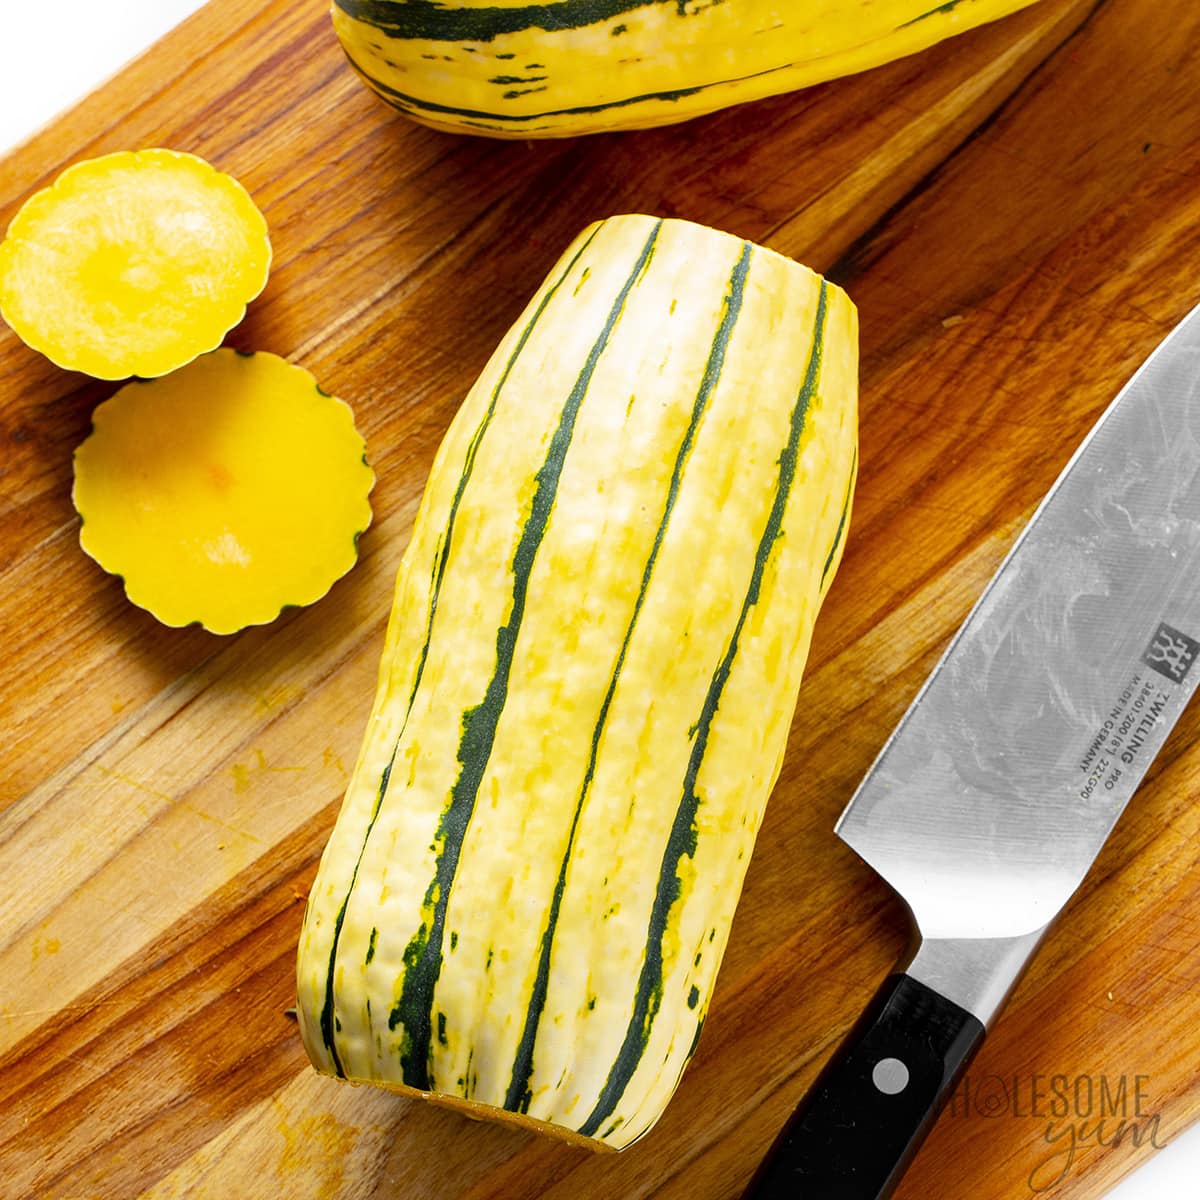 Cut the ends off the delicata squash on a cutting board.